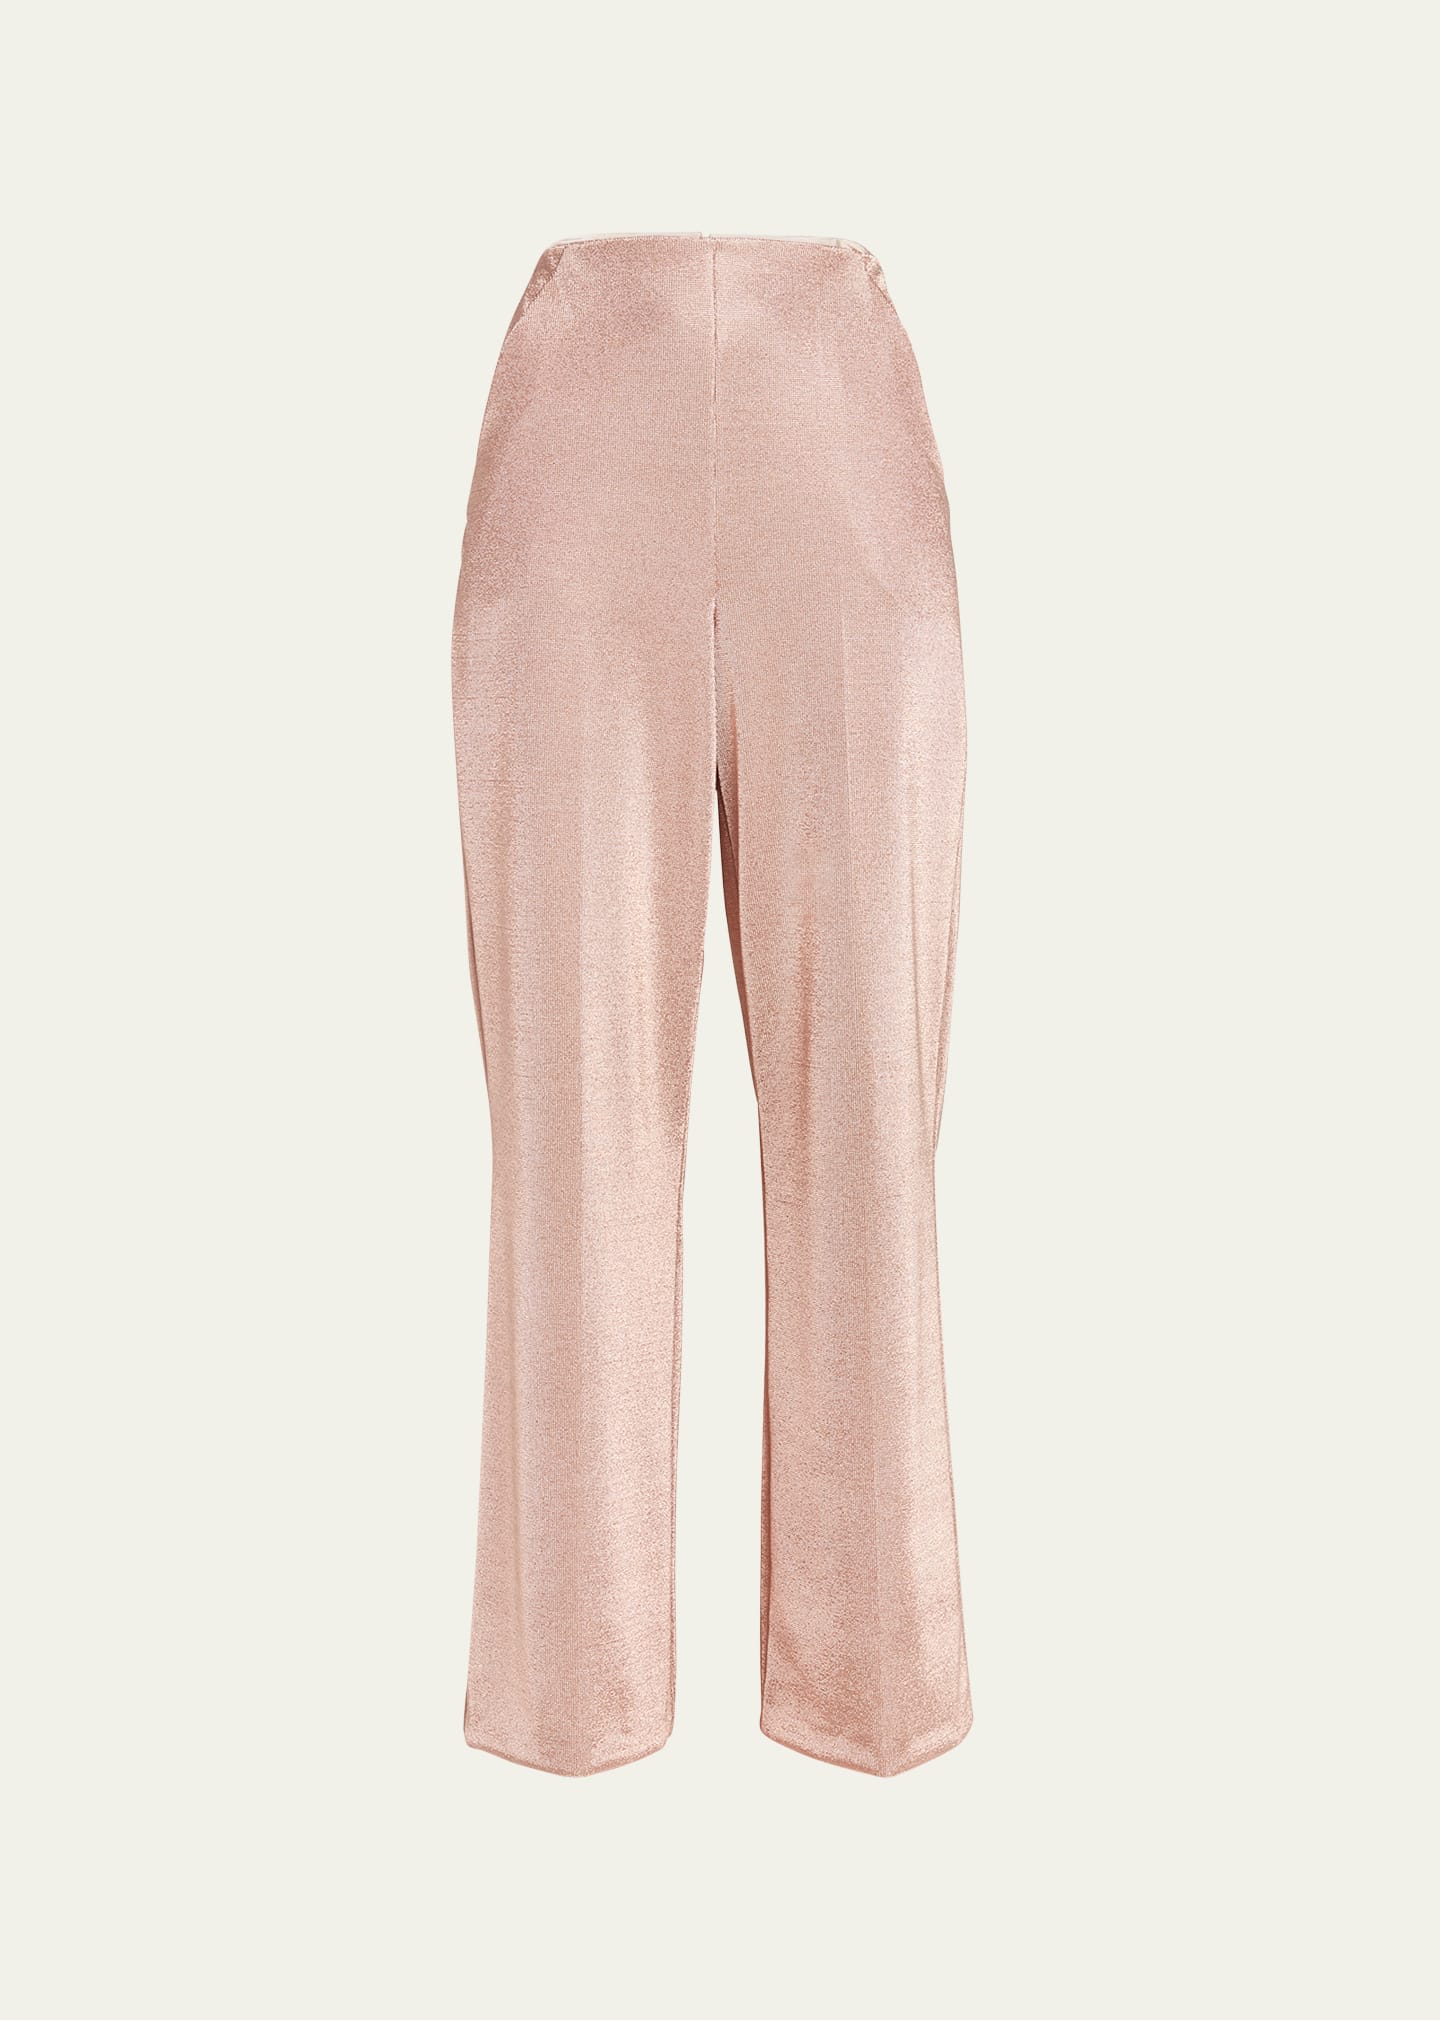 Giorgio Armani Lurex Bonded Jersey Trousers In Solid Light/paste